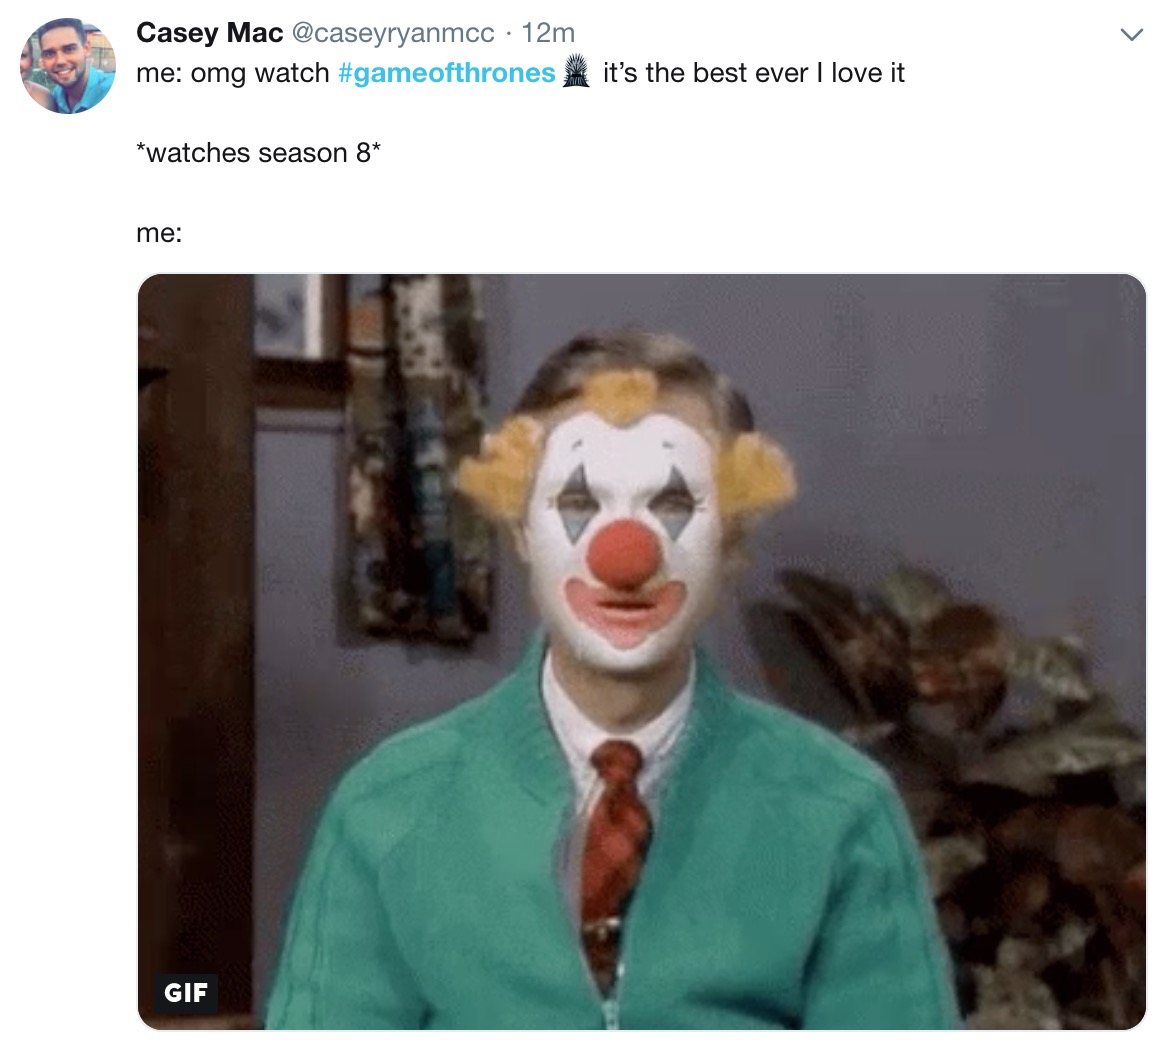 Game of Thrones Season 8 Episode 5 memes - Clown - Casey Mac 12m me omg watch it it's the best ever I love it watches season 8 me Gif